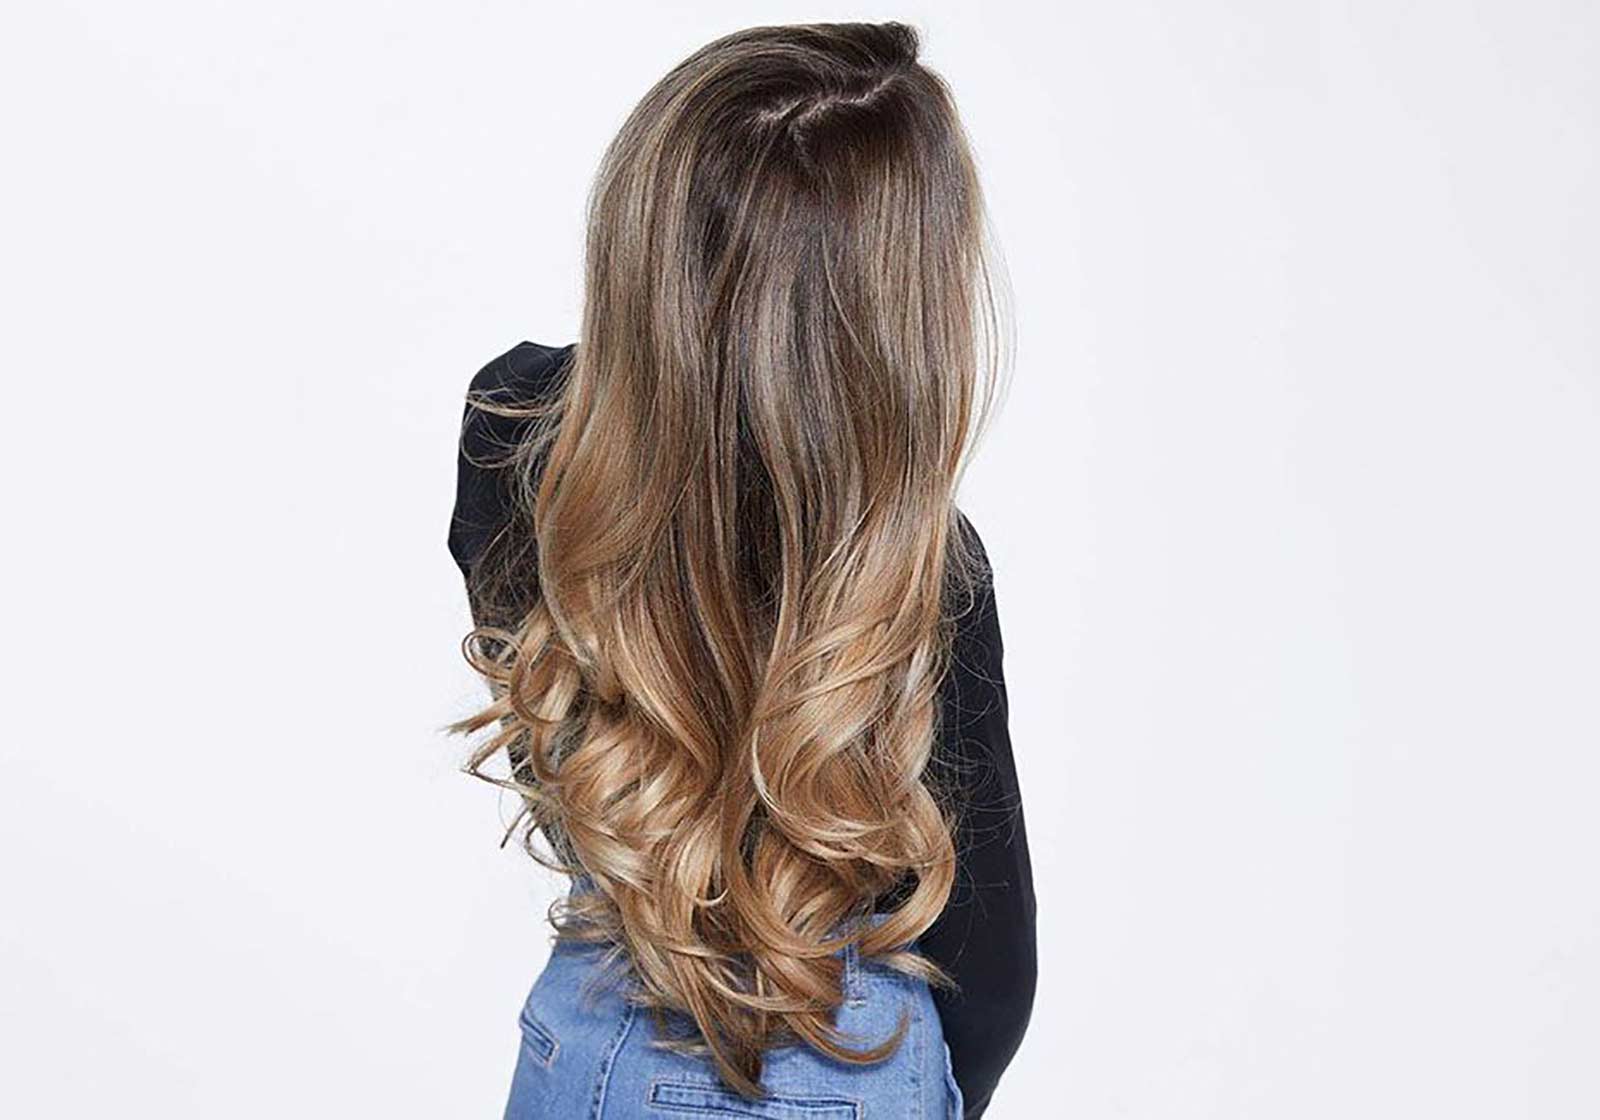 https://www.biolage.com/-/media/Project/Biolage/Biolagecom/Images/Blogs/7-important-things-to-know-about-balayage-highlights/blonde-balayage-1.jpg?h=1120&w=1600&hash=3E94525A392AAB69C791784CF5433AF0